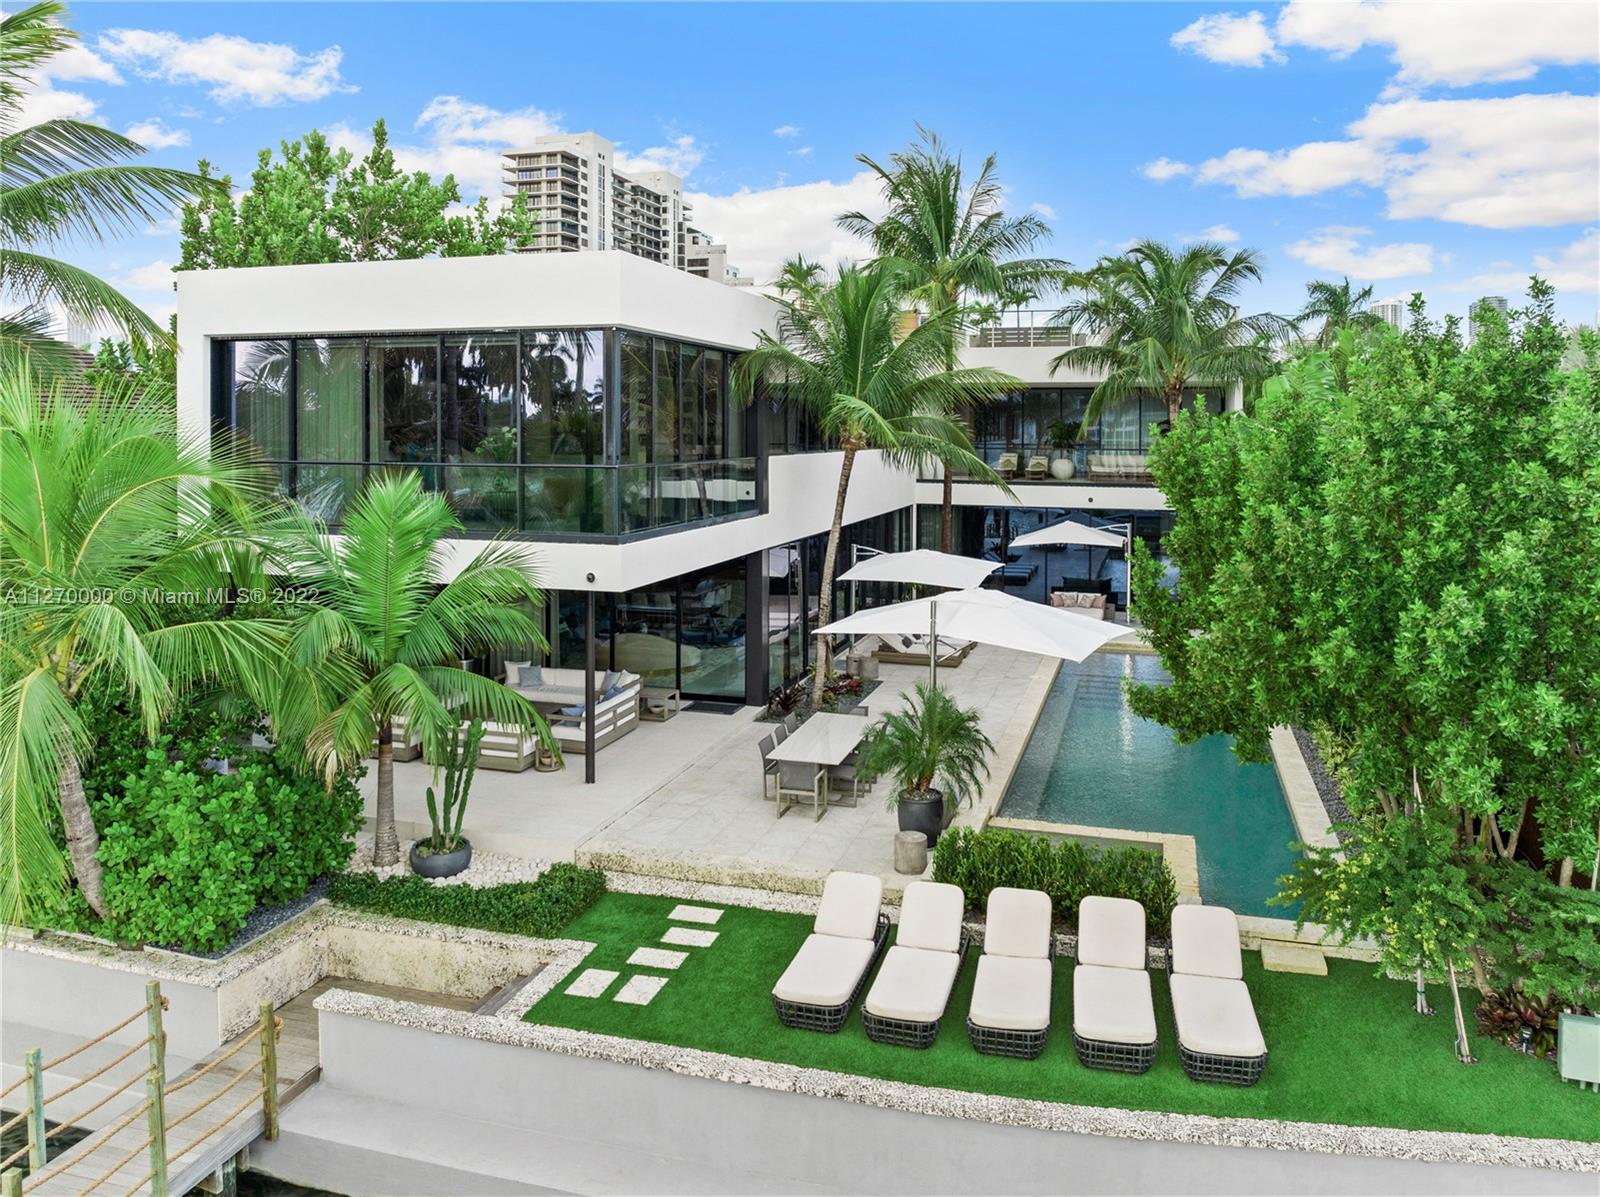 A stunning tropical contemporary home located on the tip of coveted Biscayne Island with unobstructed breathtaking views of Miami & Biscayne Bay. Redesigned in 2020 with an approx. $5M renovation, this residence offers telescopic floor to ceiling pocket sliding glass doors which seamlessly blend the interior space with the lush gardens & pool. Surrounded by a perfectly manicured lawn, exotic imported palm trees & living walls, 1000+ SF of outdoor spaces & an expansive rooftop to take in the beautiful sunsets. Boasting Italian porcelain & wood flooring, custom teak kitchen cabinets, industrial double subzero refrigerators & Bosch & Miele appliances. Located on the Venetian Islands between Miami Beach & Downtown & minutes away from Sunset Harbour, Design District, Wynwood & MIA Airport